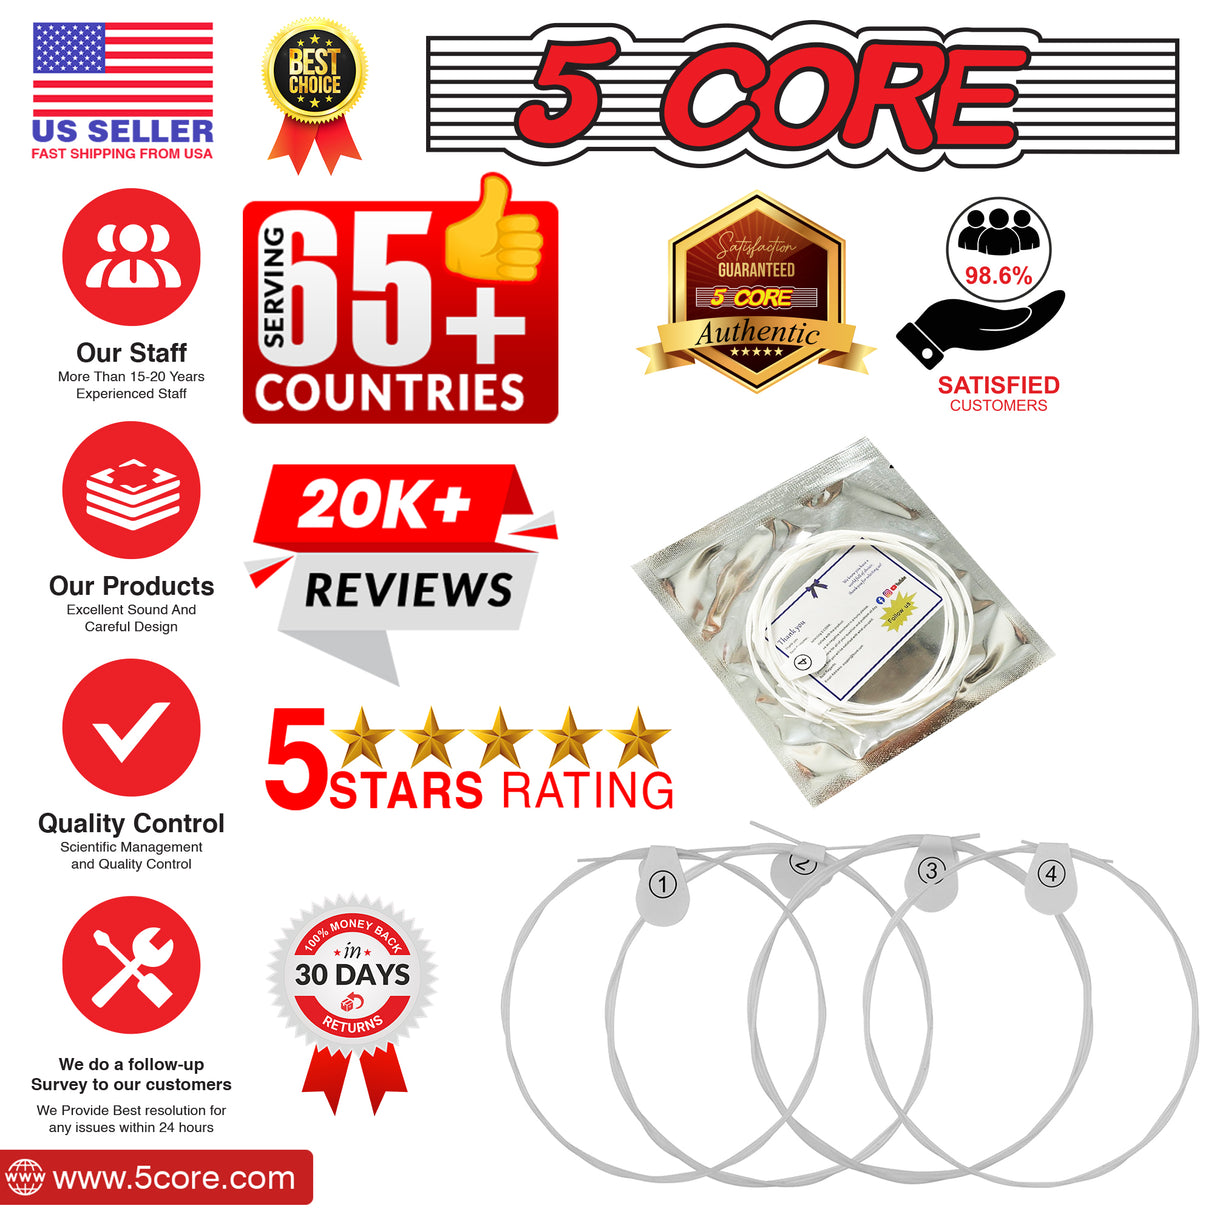 5 Core Ukulele Strings, Tuning Replacement 4 Pieces String in 1 Pack for Musical Instruments Easy for Beginners Easy on Fingertips for General Ukulele Sweet Sound UKS 4PCS